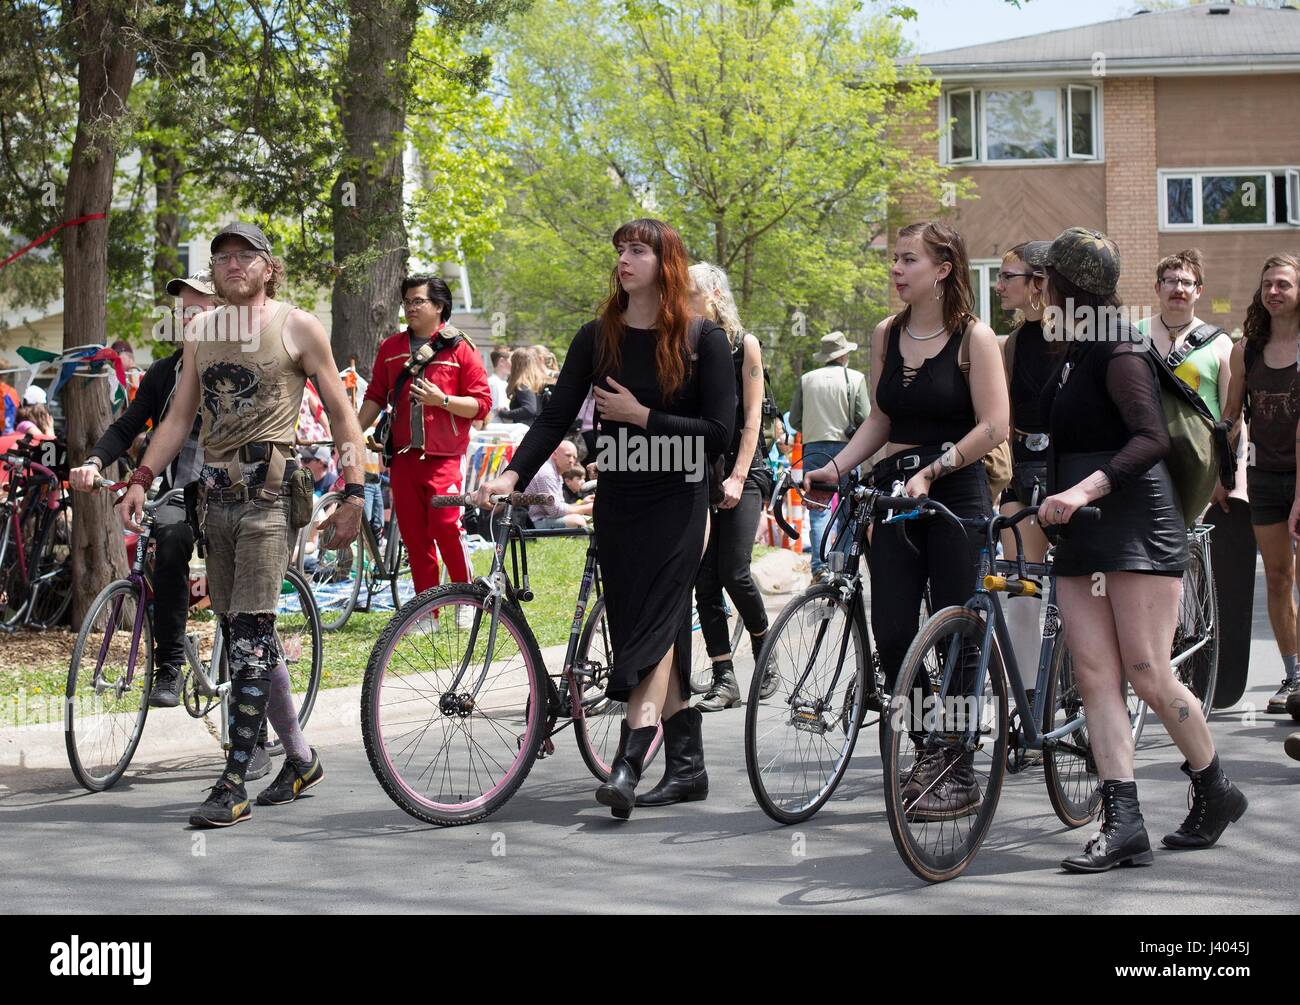 A group of young people dressed in black, with bicycles, at the Mayday parade in Minneapolis, Minnesota, USA. Stock Photo